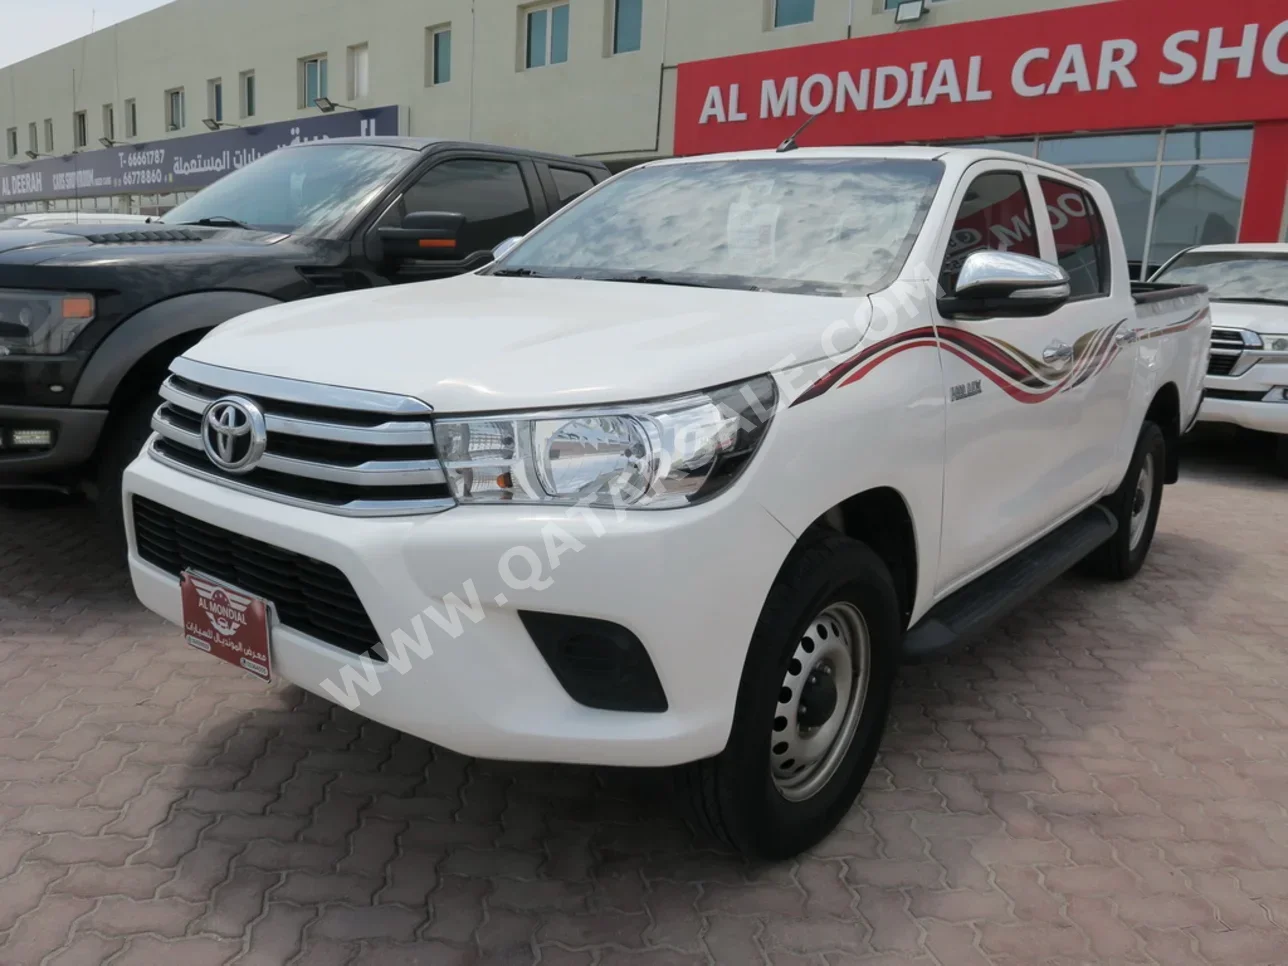 Toyota  Hilux  2019  Automatic  208,000 Km  4 Cylinder  Four Wheel Drive (4WD)  Pick Up  White